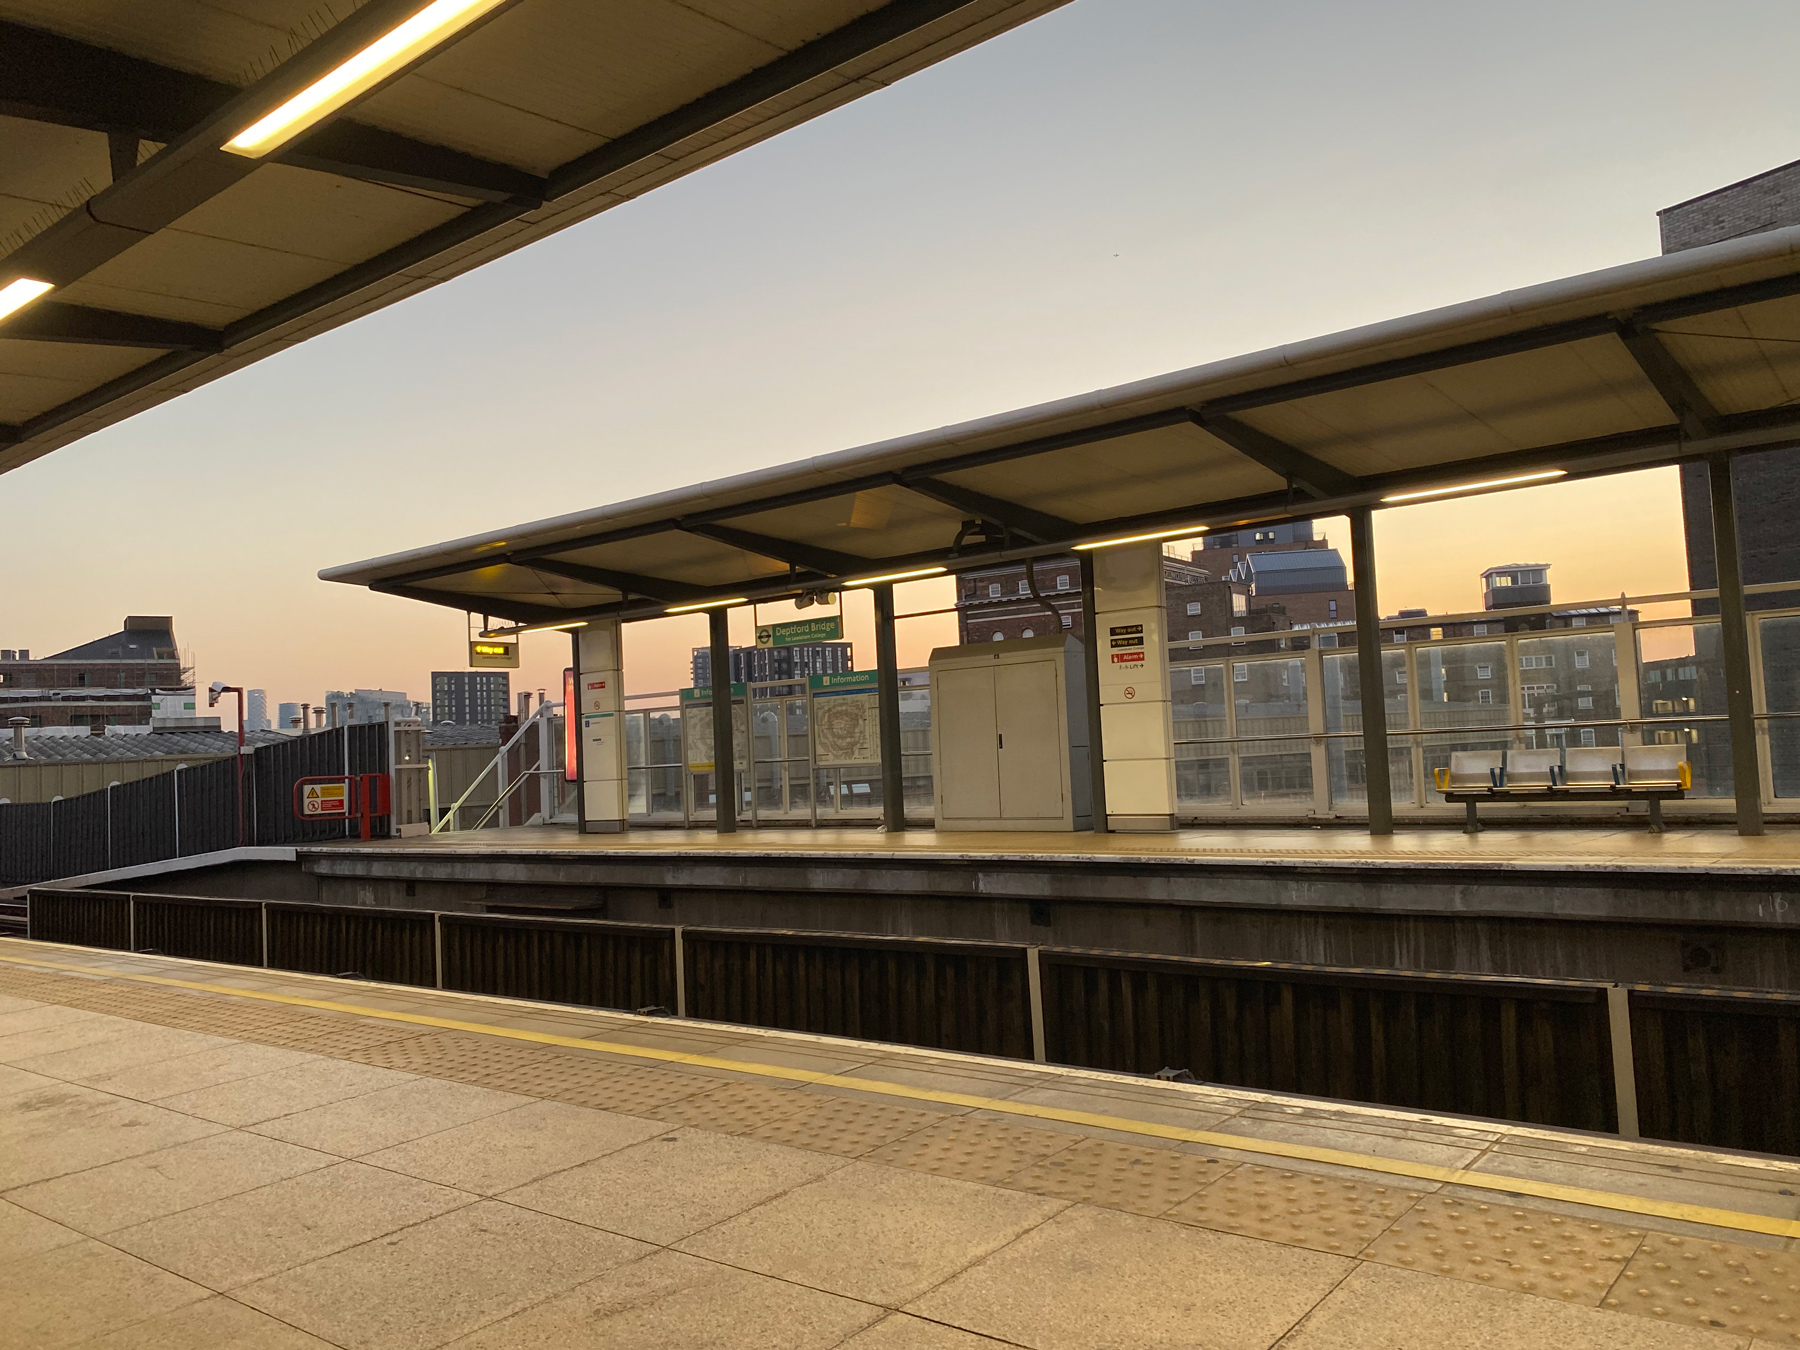 A view of the sunrise behind Deptford Bridge station